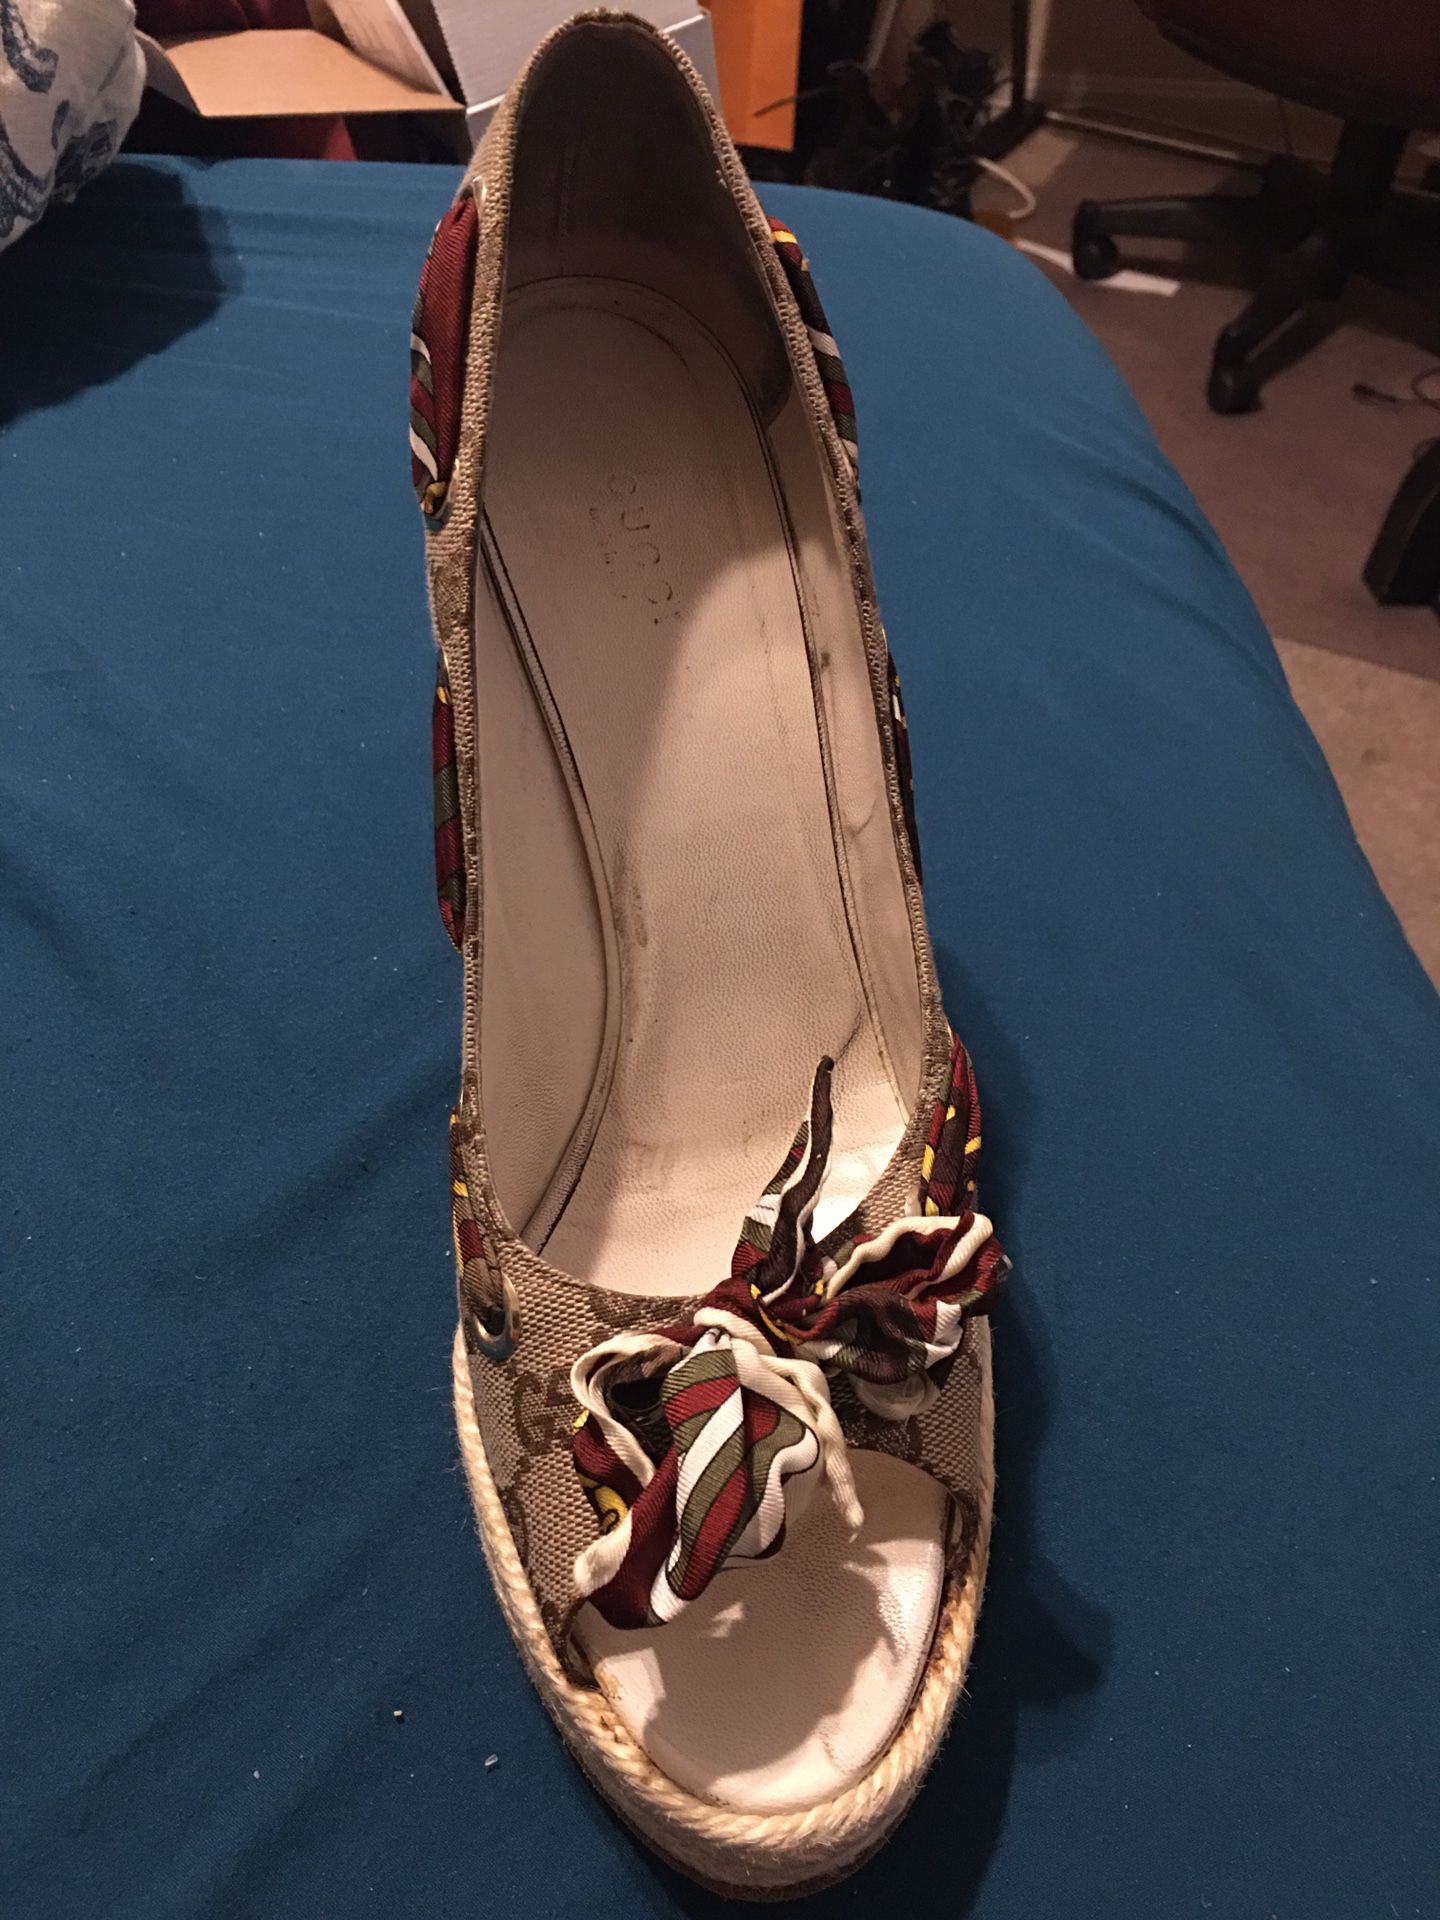 Authentic Gucci and Burberry heels